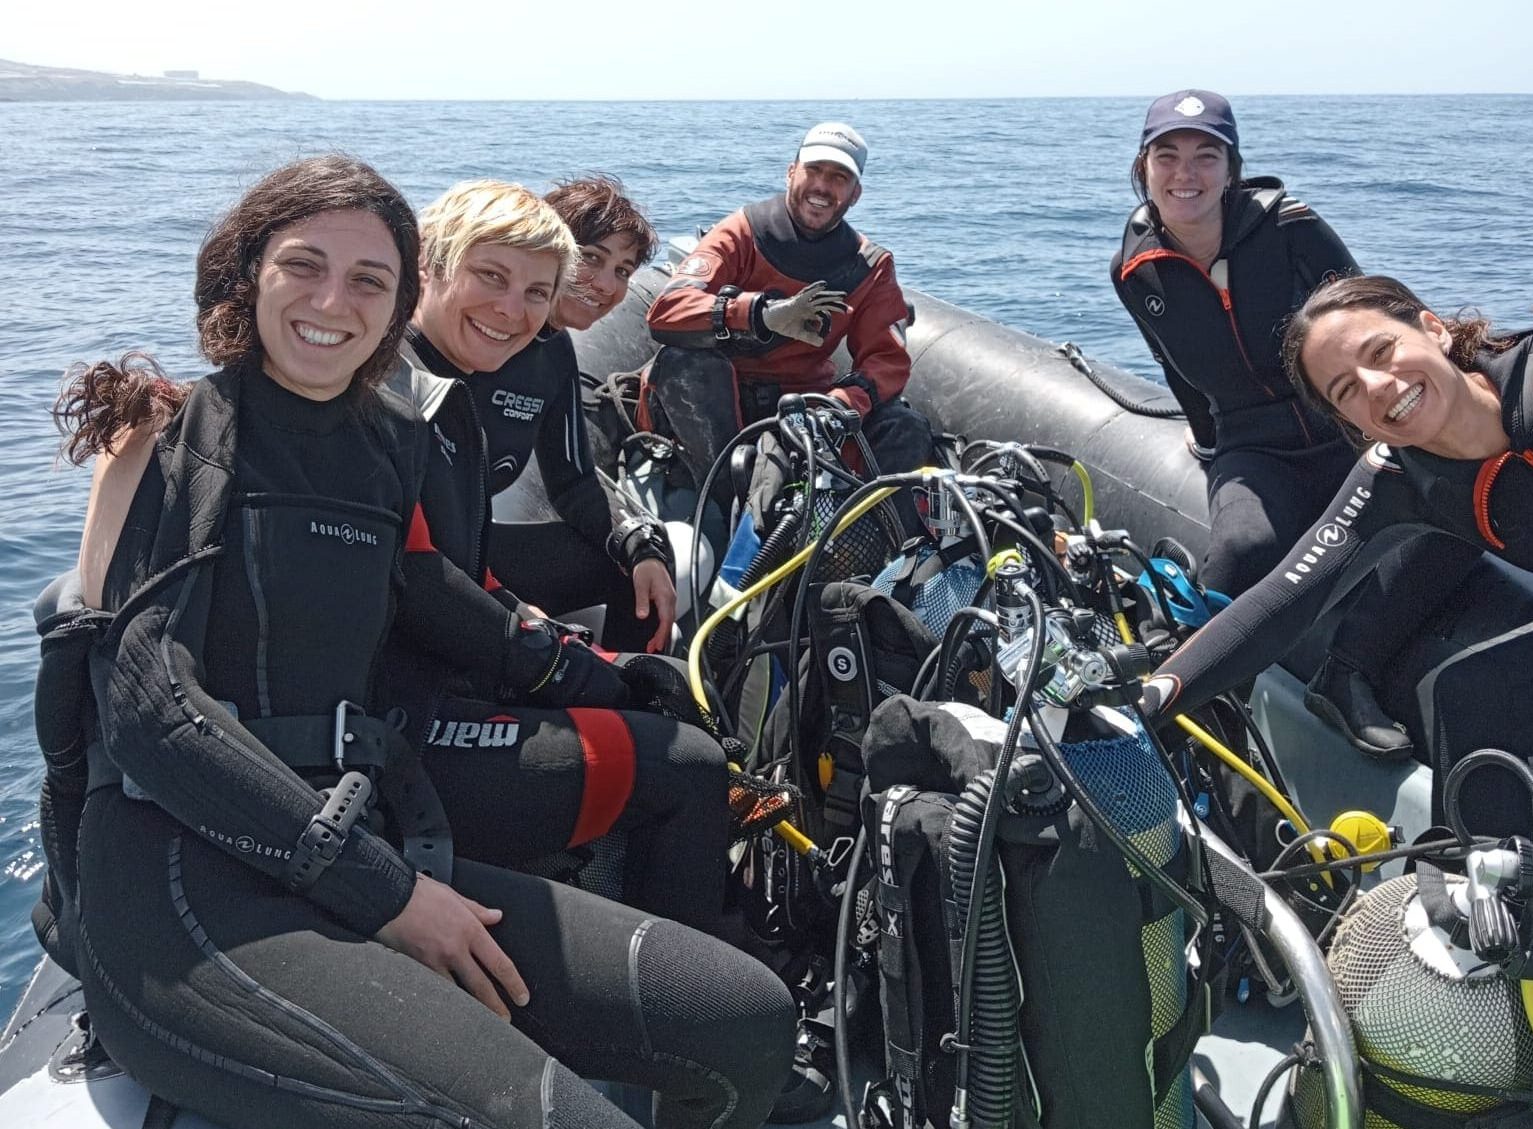 1st campaign of the Ocean Citizen project in Tenerife